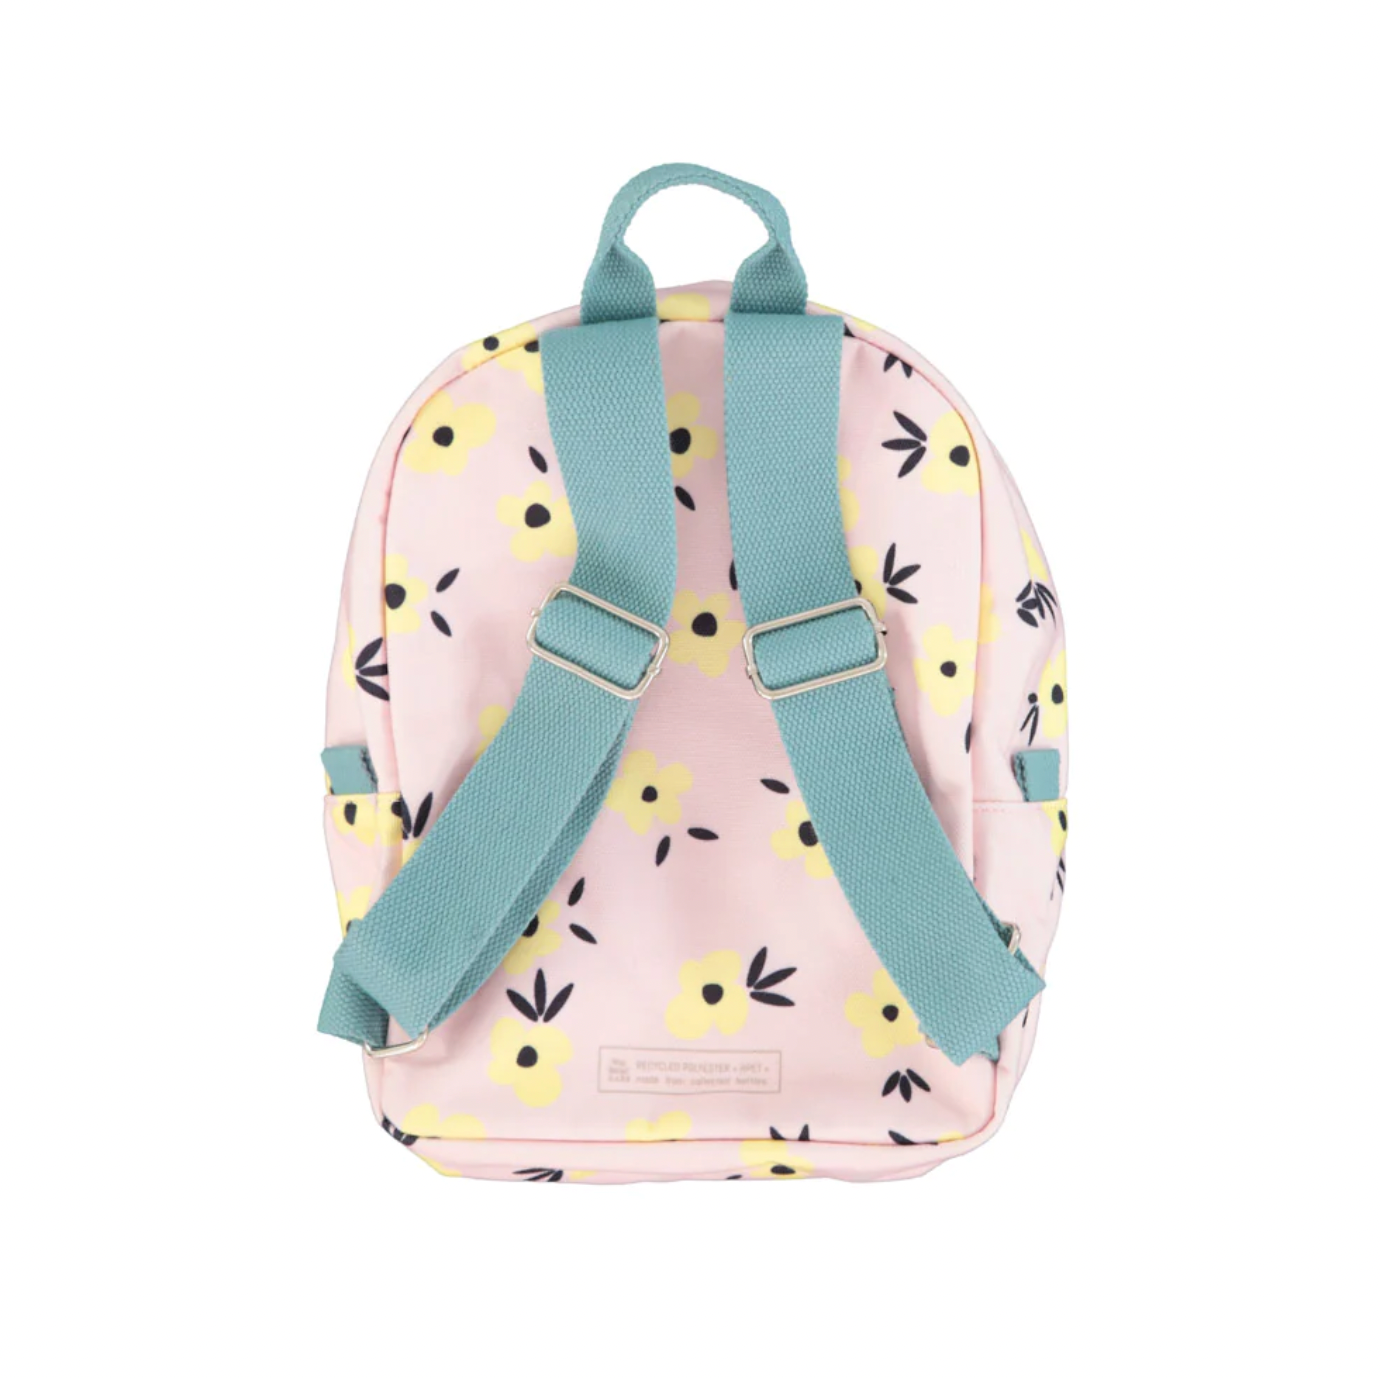 Small backpack - Pale pink and yellow flowers